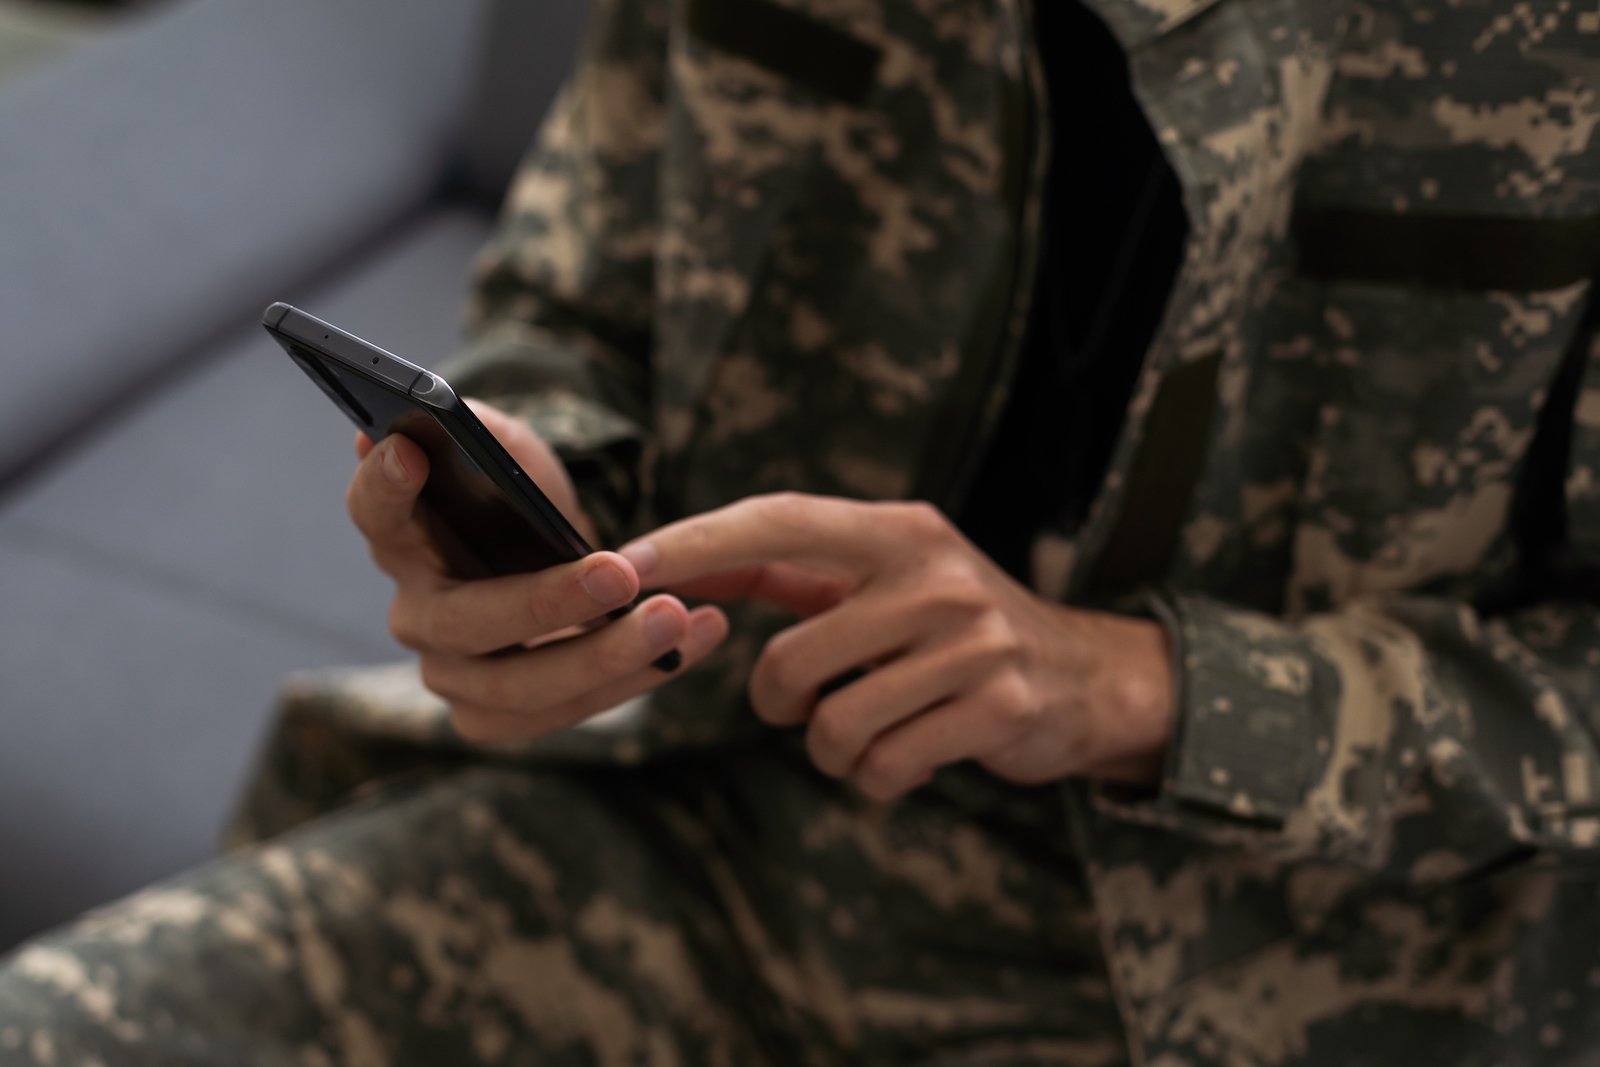 A person in army fatigues, holding a cellphone